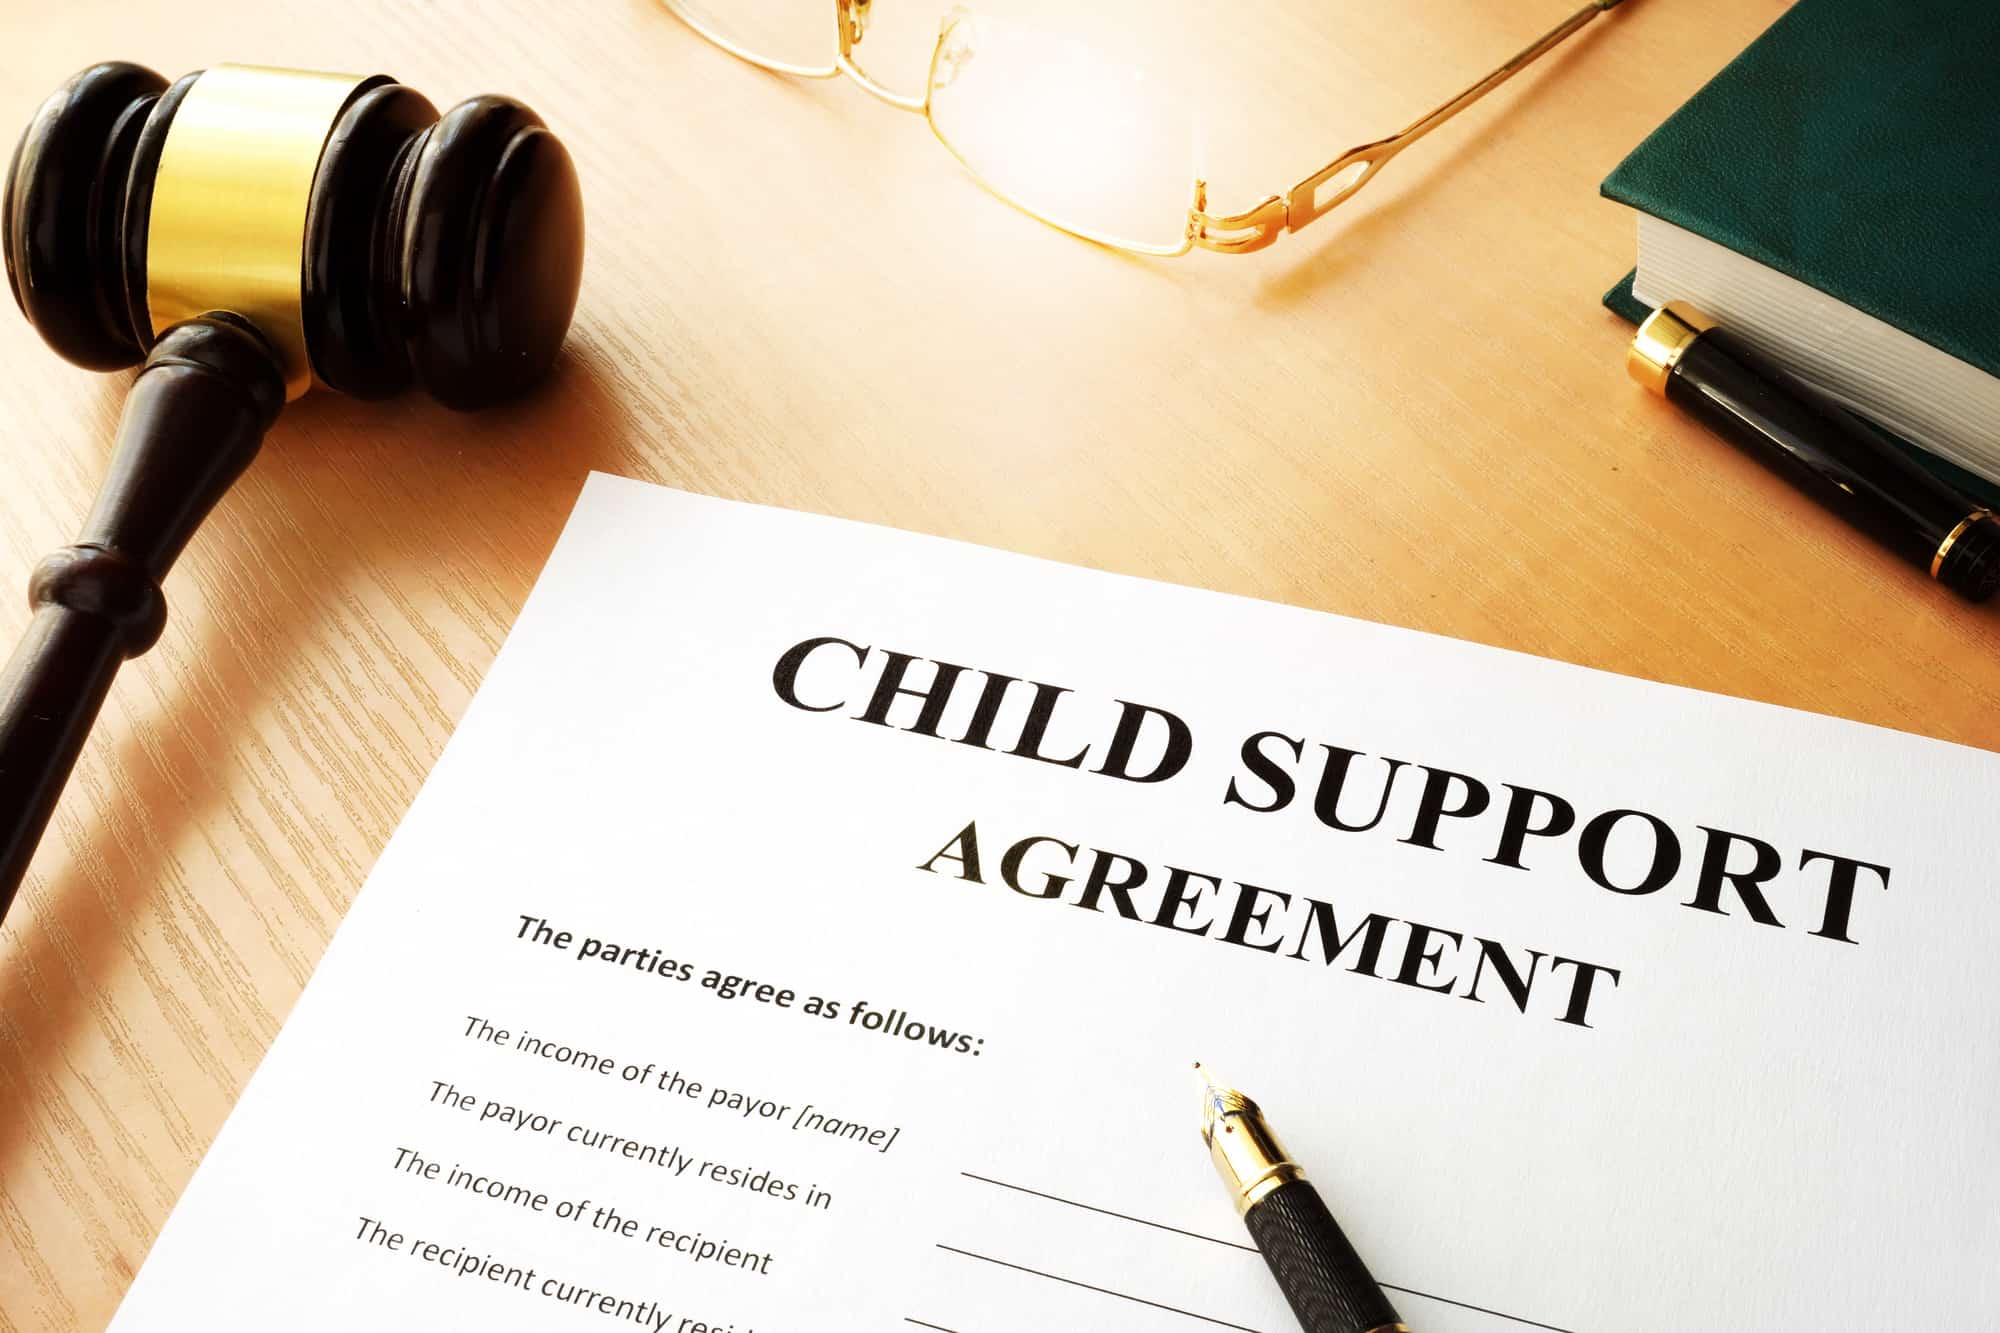 New Mexico child support agreement lacking signature. 